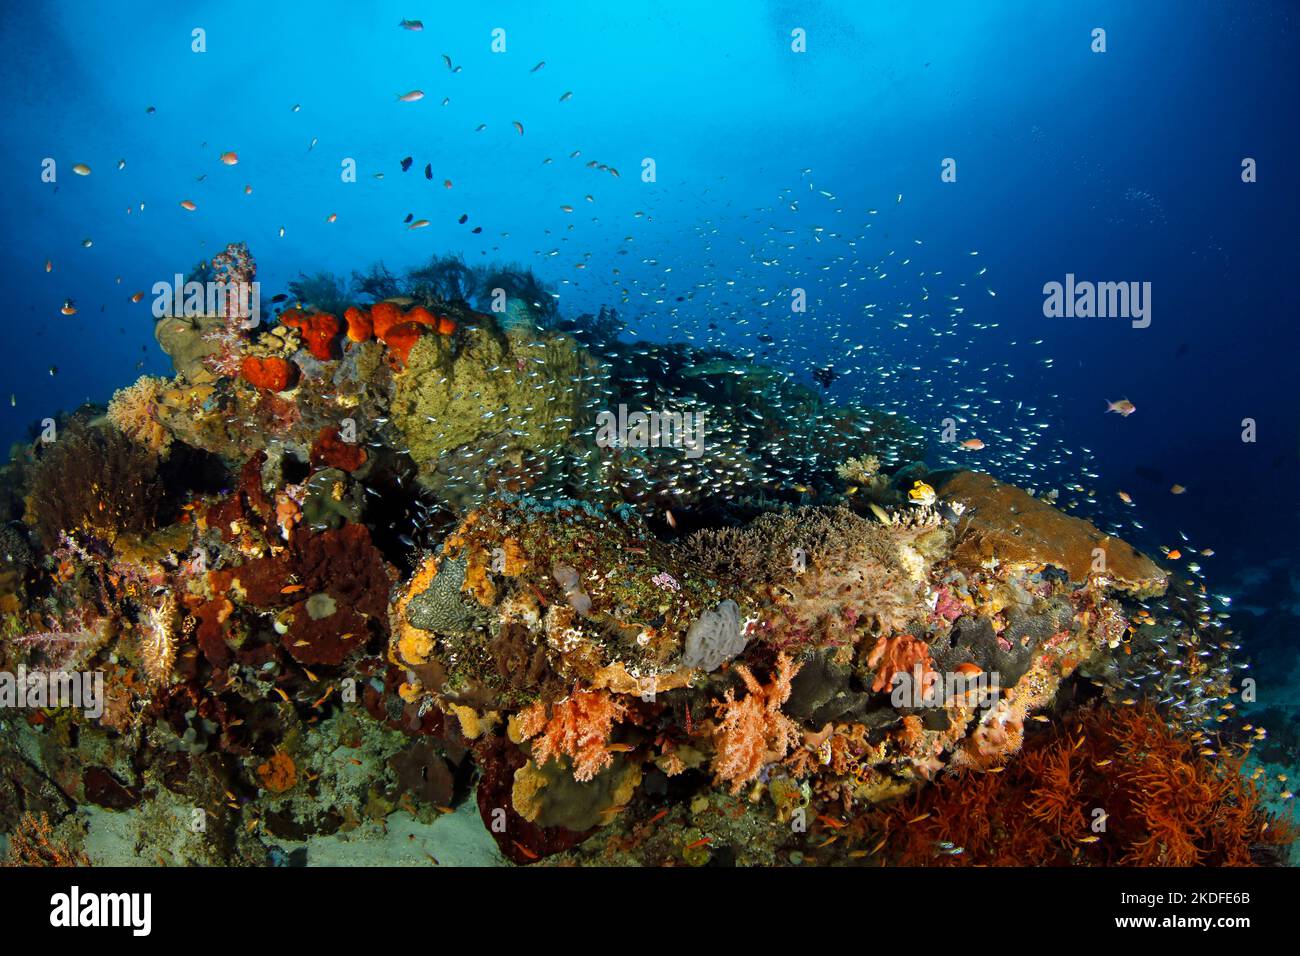 Colorful Coral Reef Teeming with Life. Fam, Raja Ampat, Indonesia Stock Photo